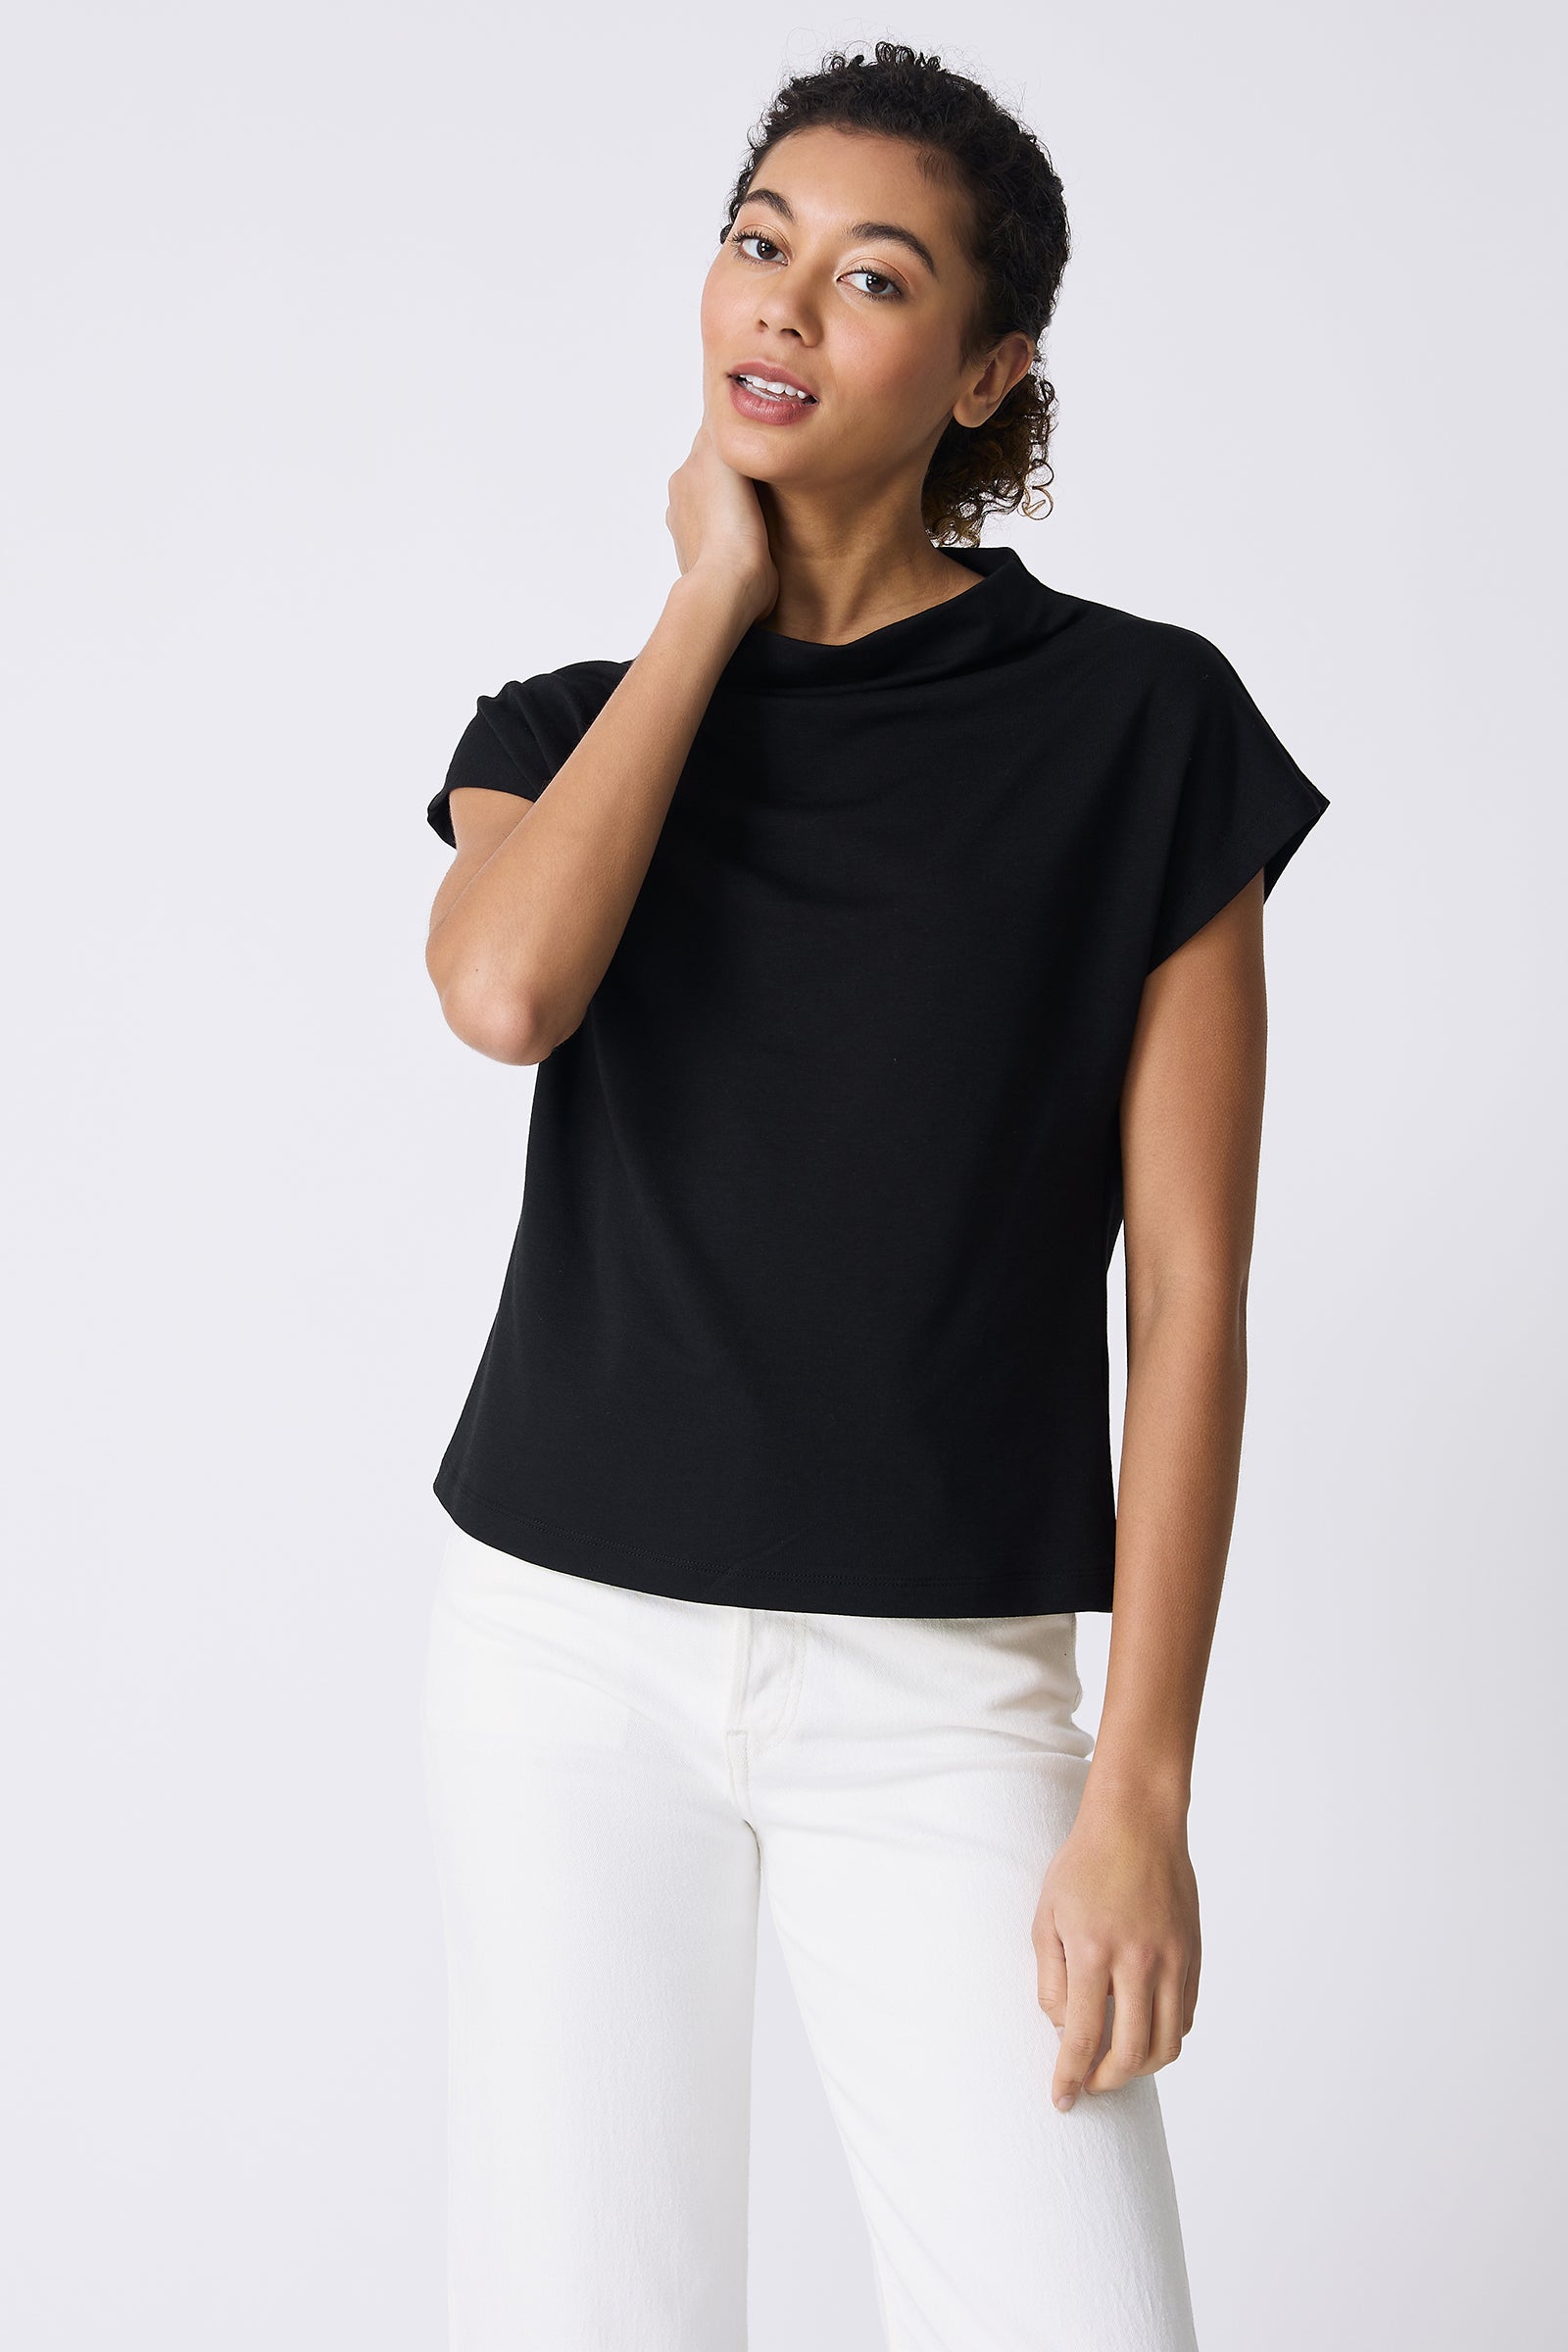 Shop All Tops and Blouses – KAL RIEMAN